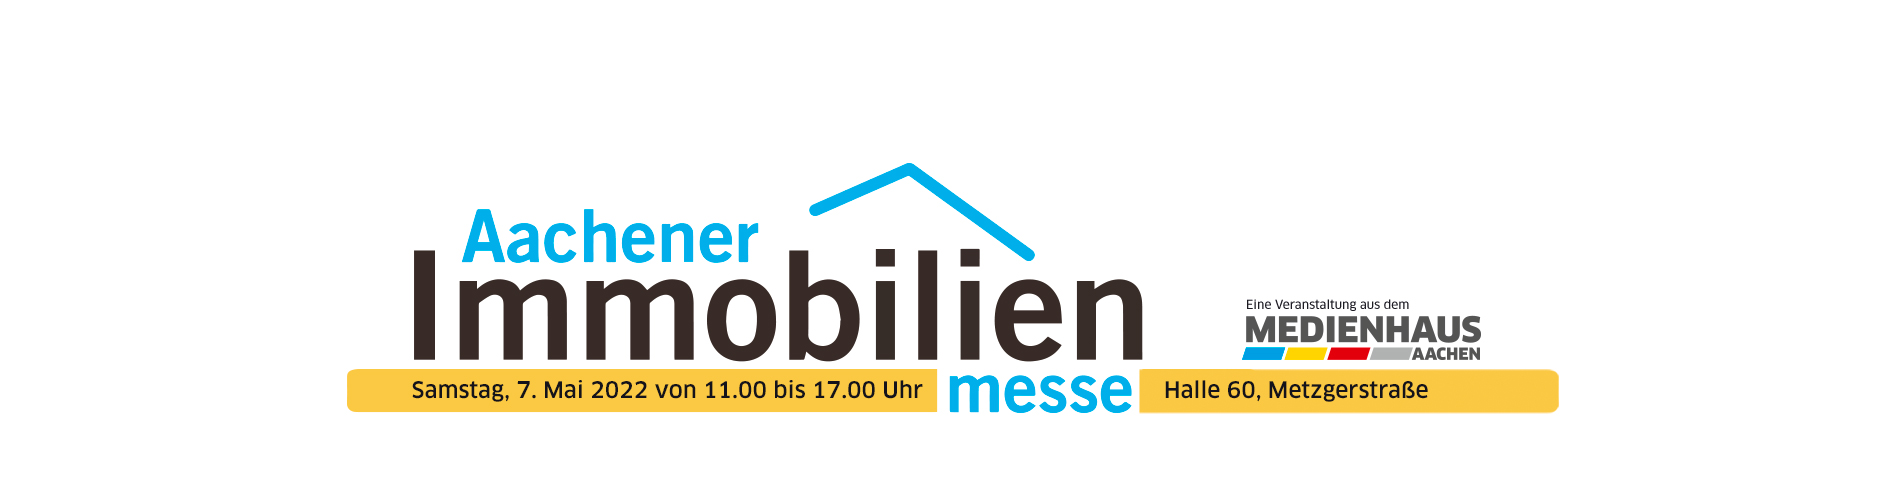 Immobilienmesse Aachen 2022